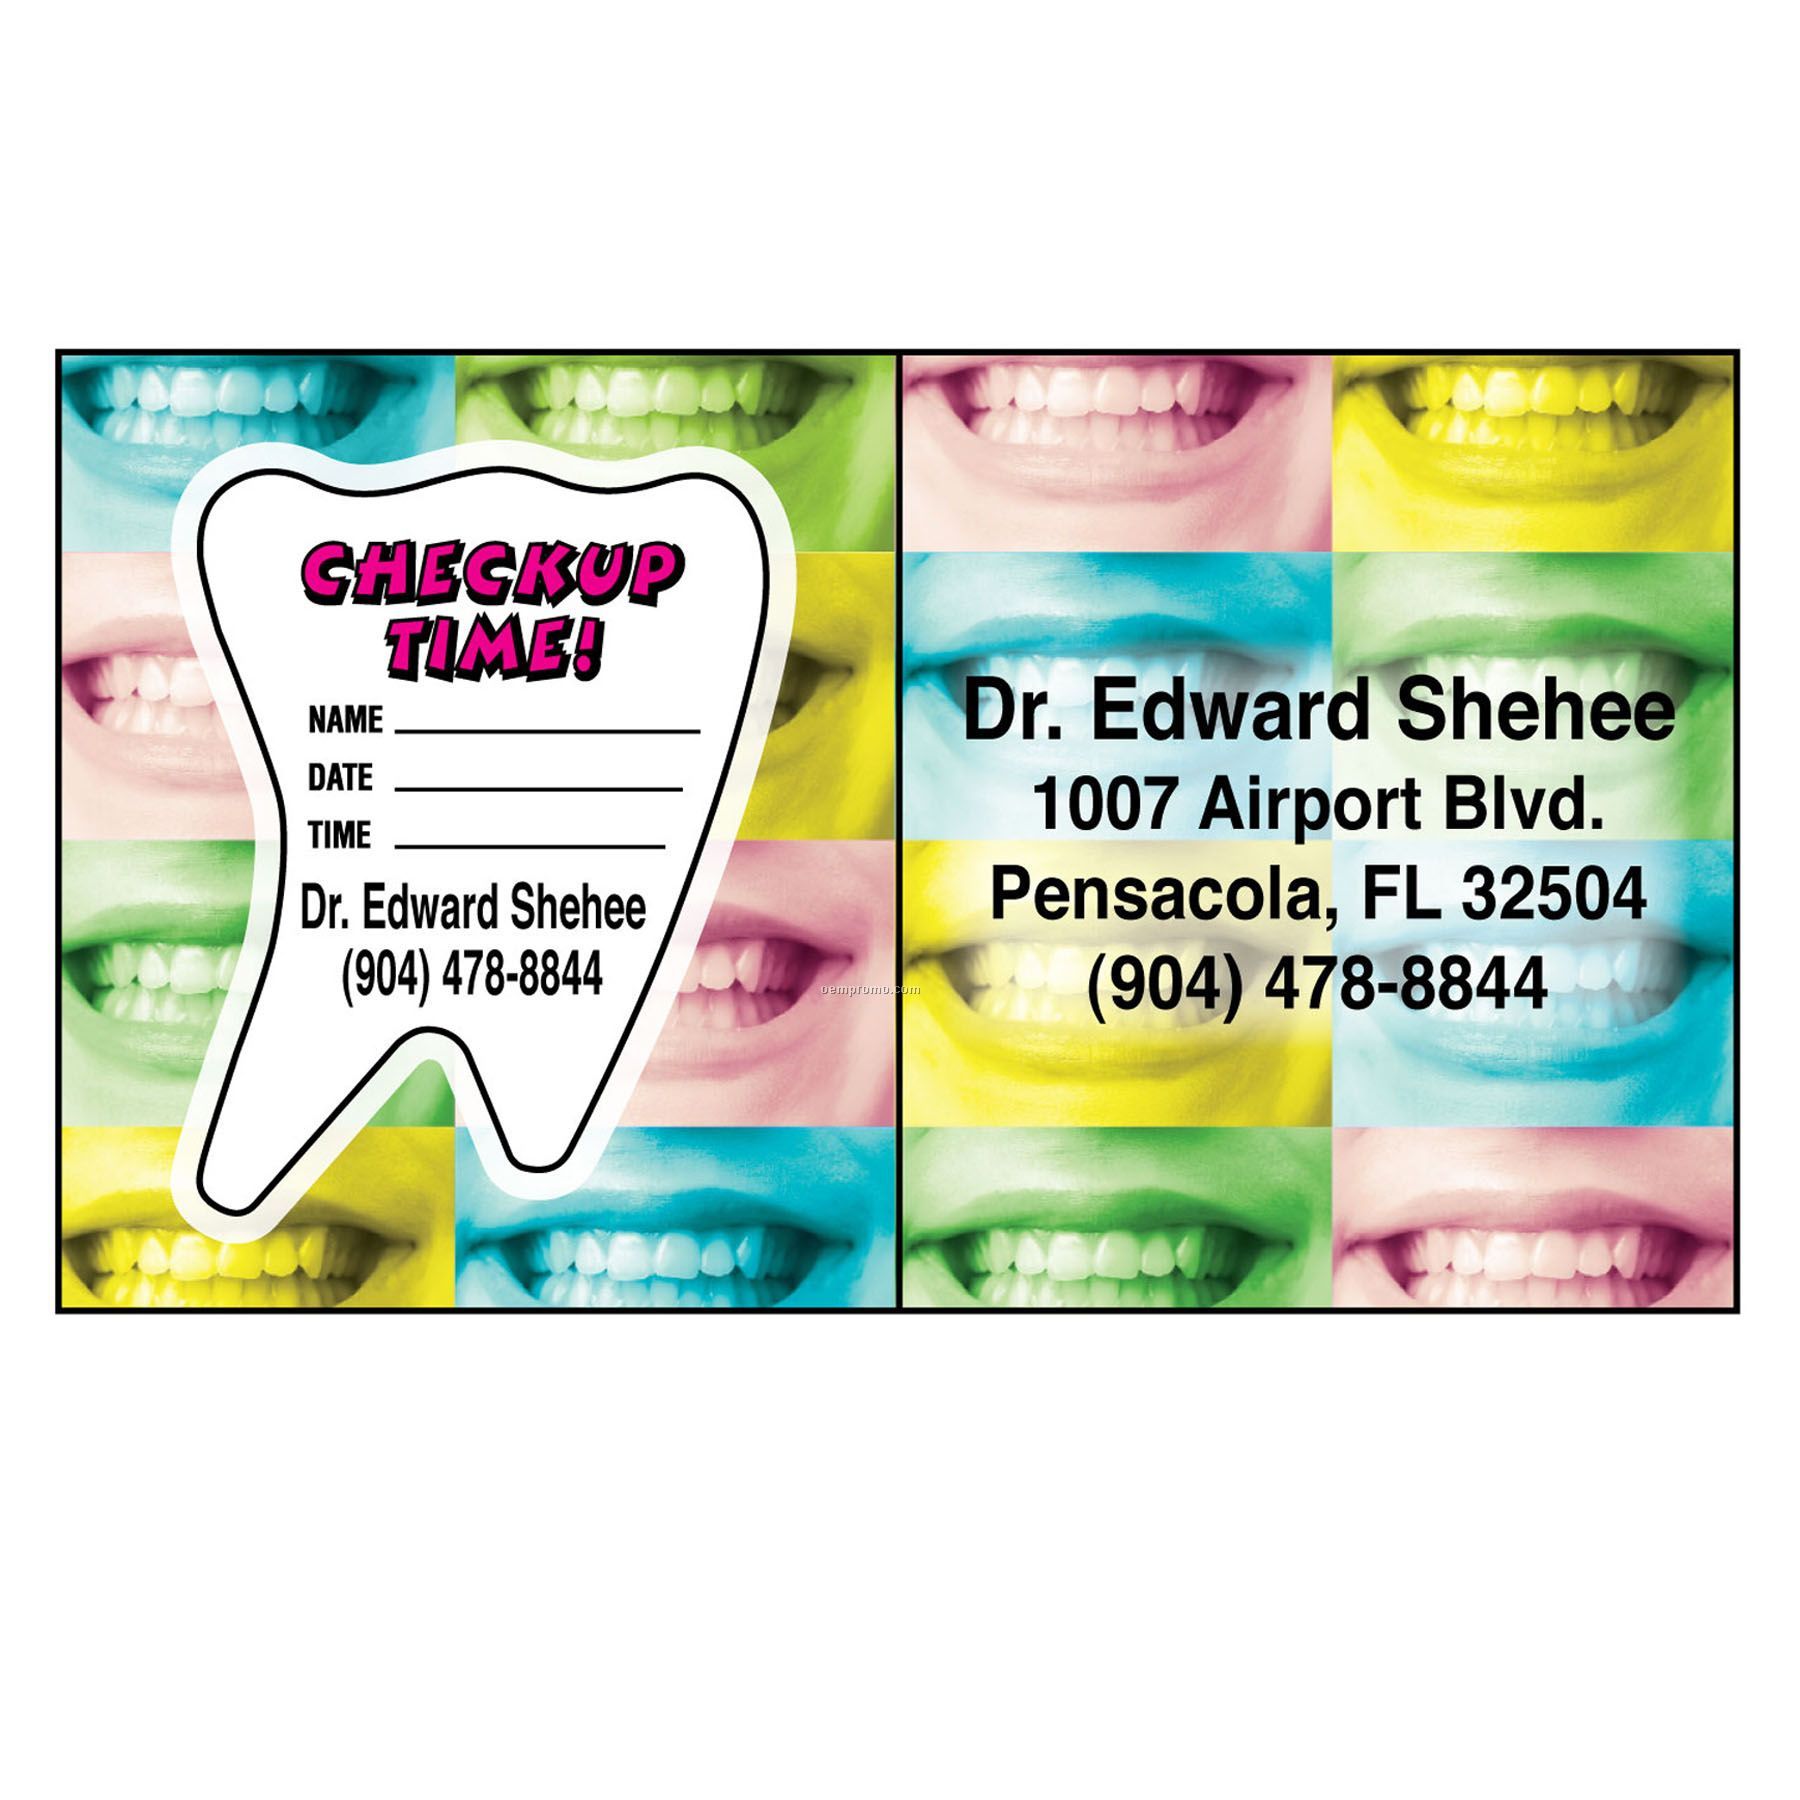 2" X 3.5" Appointment Reminder Card- Tooth